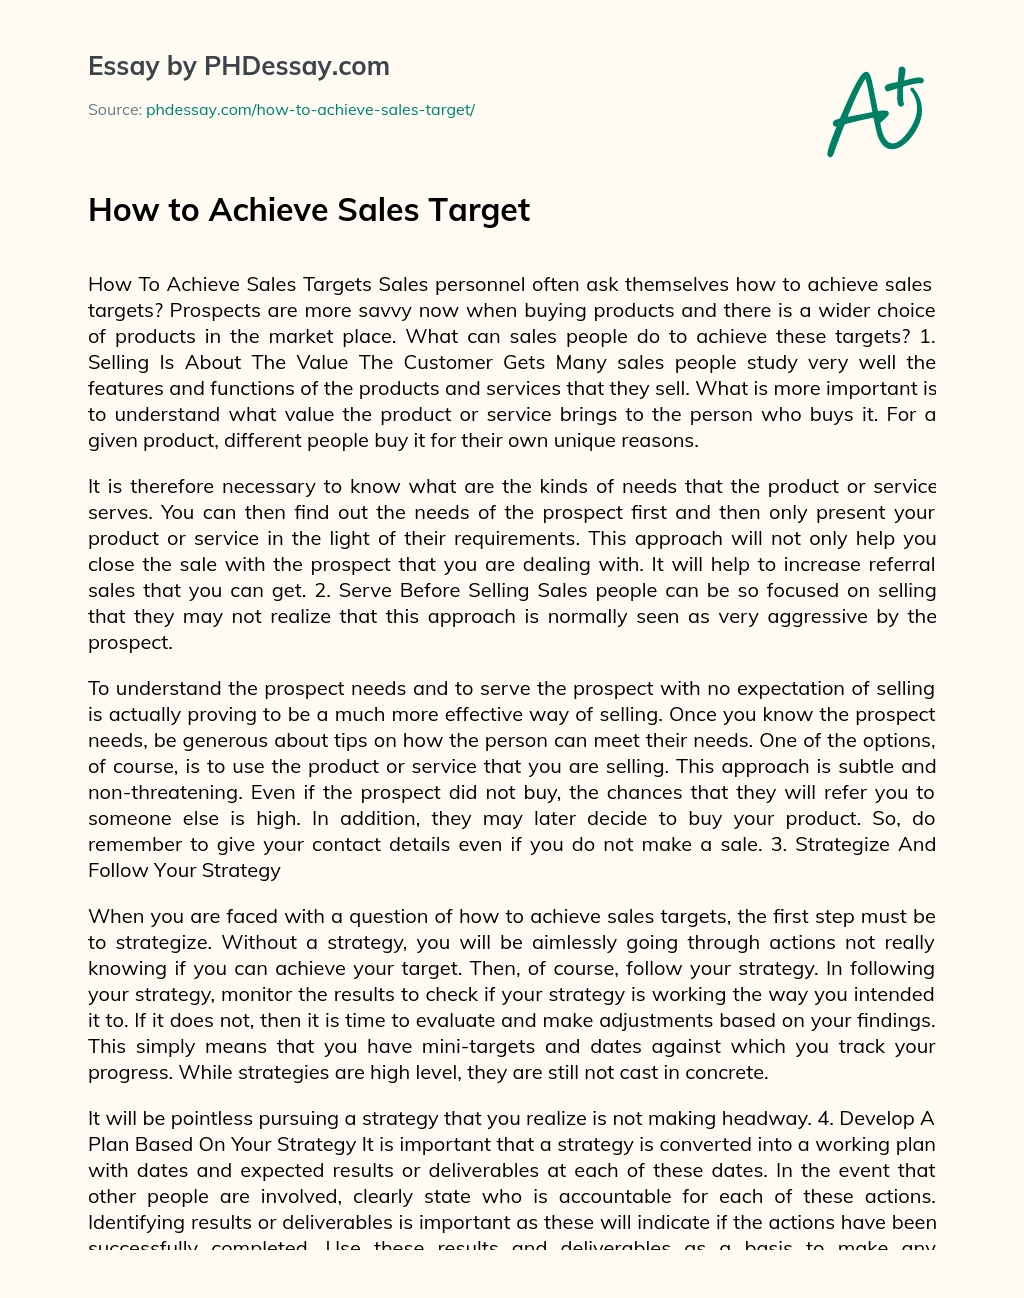 How to Achieve Sales Target essay